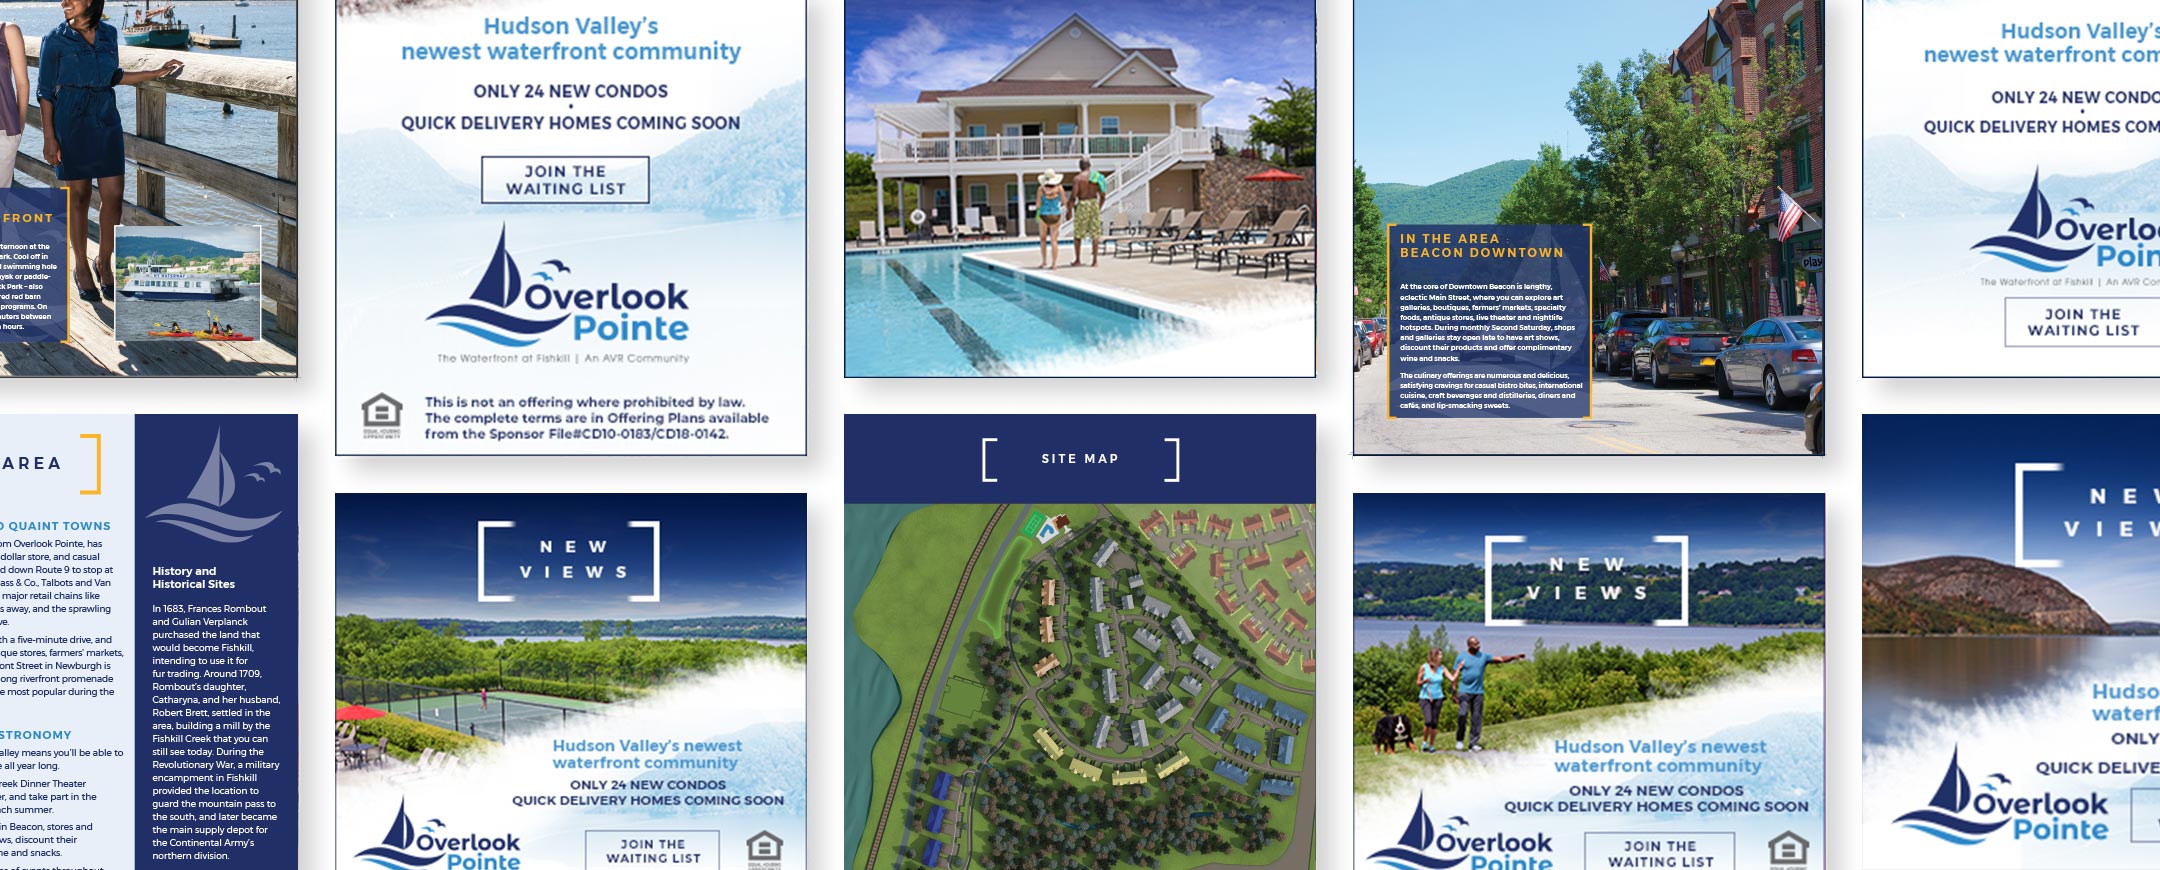 AVR Realty - Overlook Pointe Digital Ads and Creative